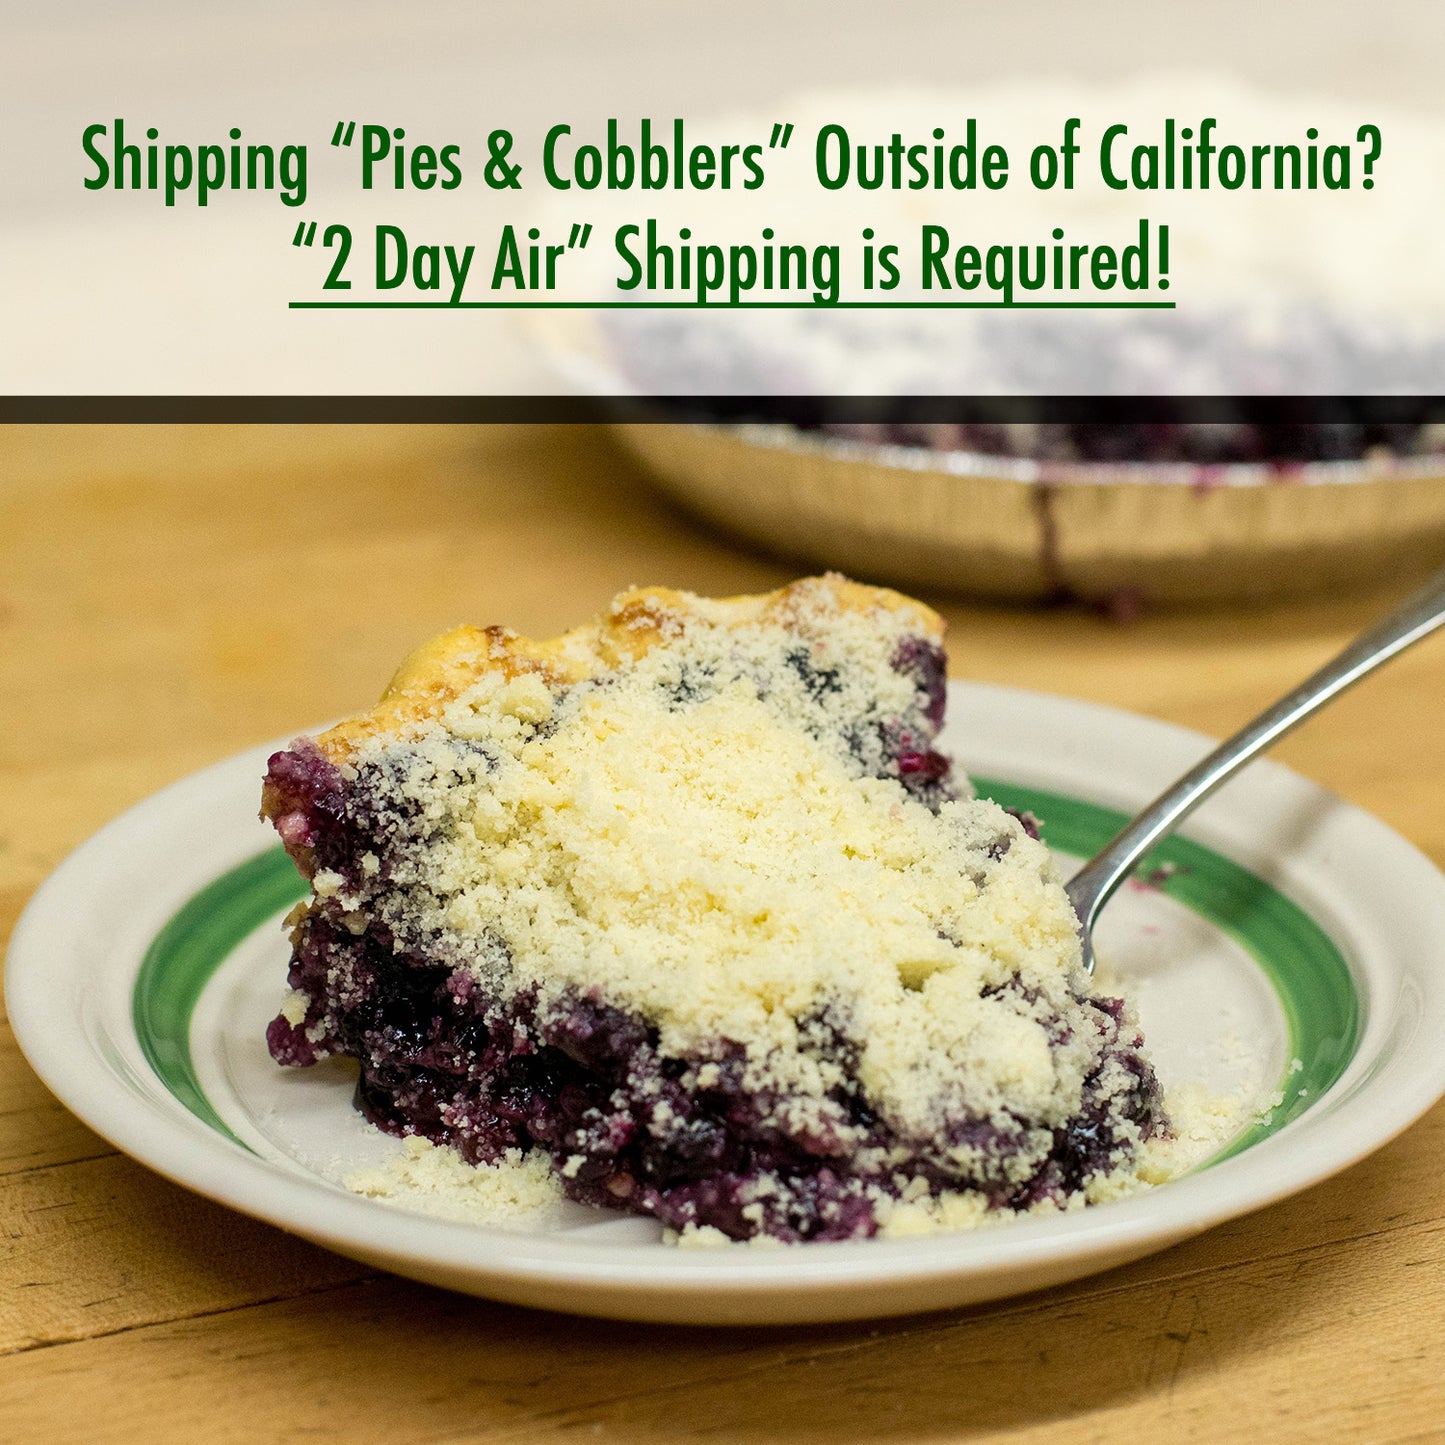 marionberry cobbler, if shipping outside of california, 2 day air shipping required